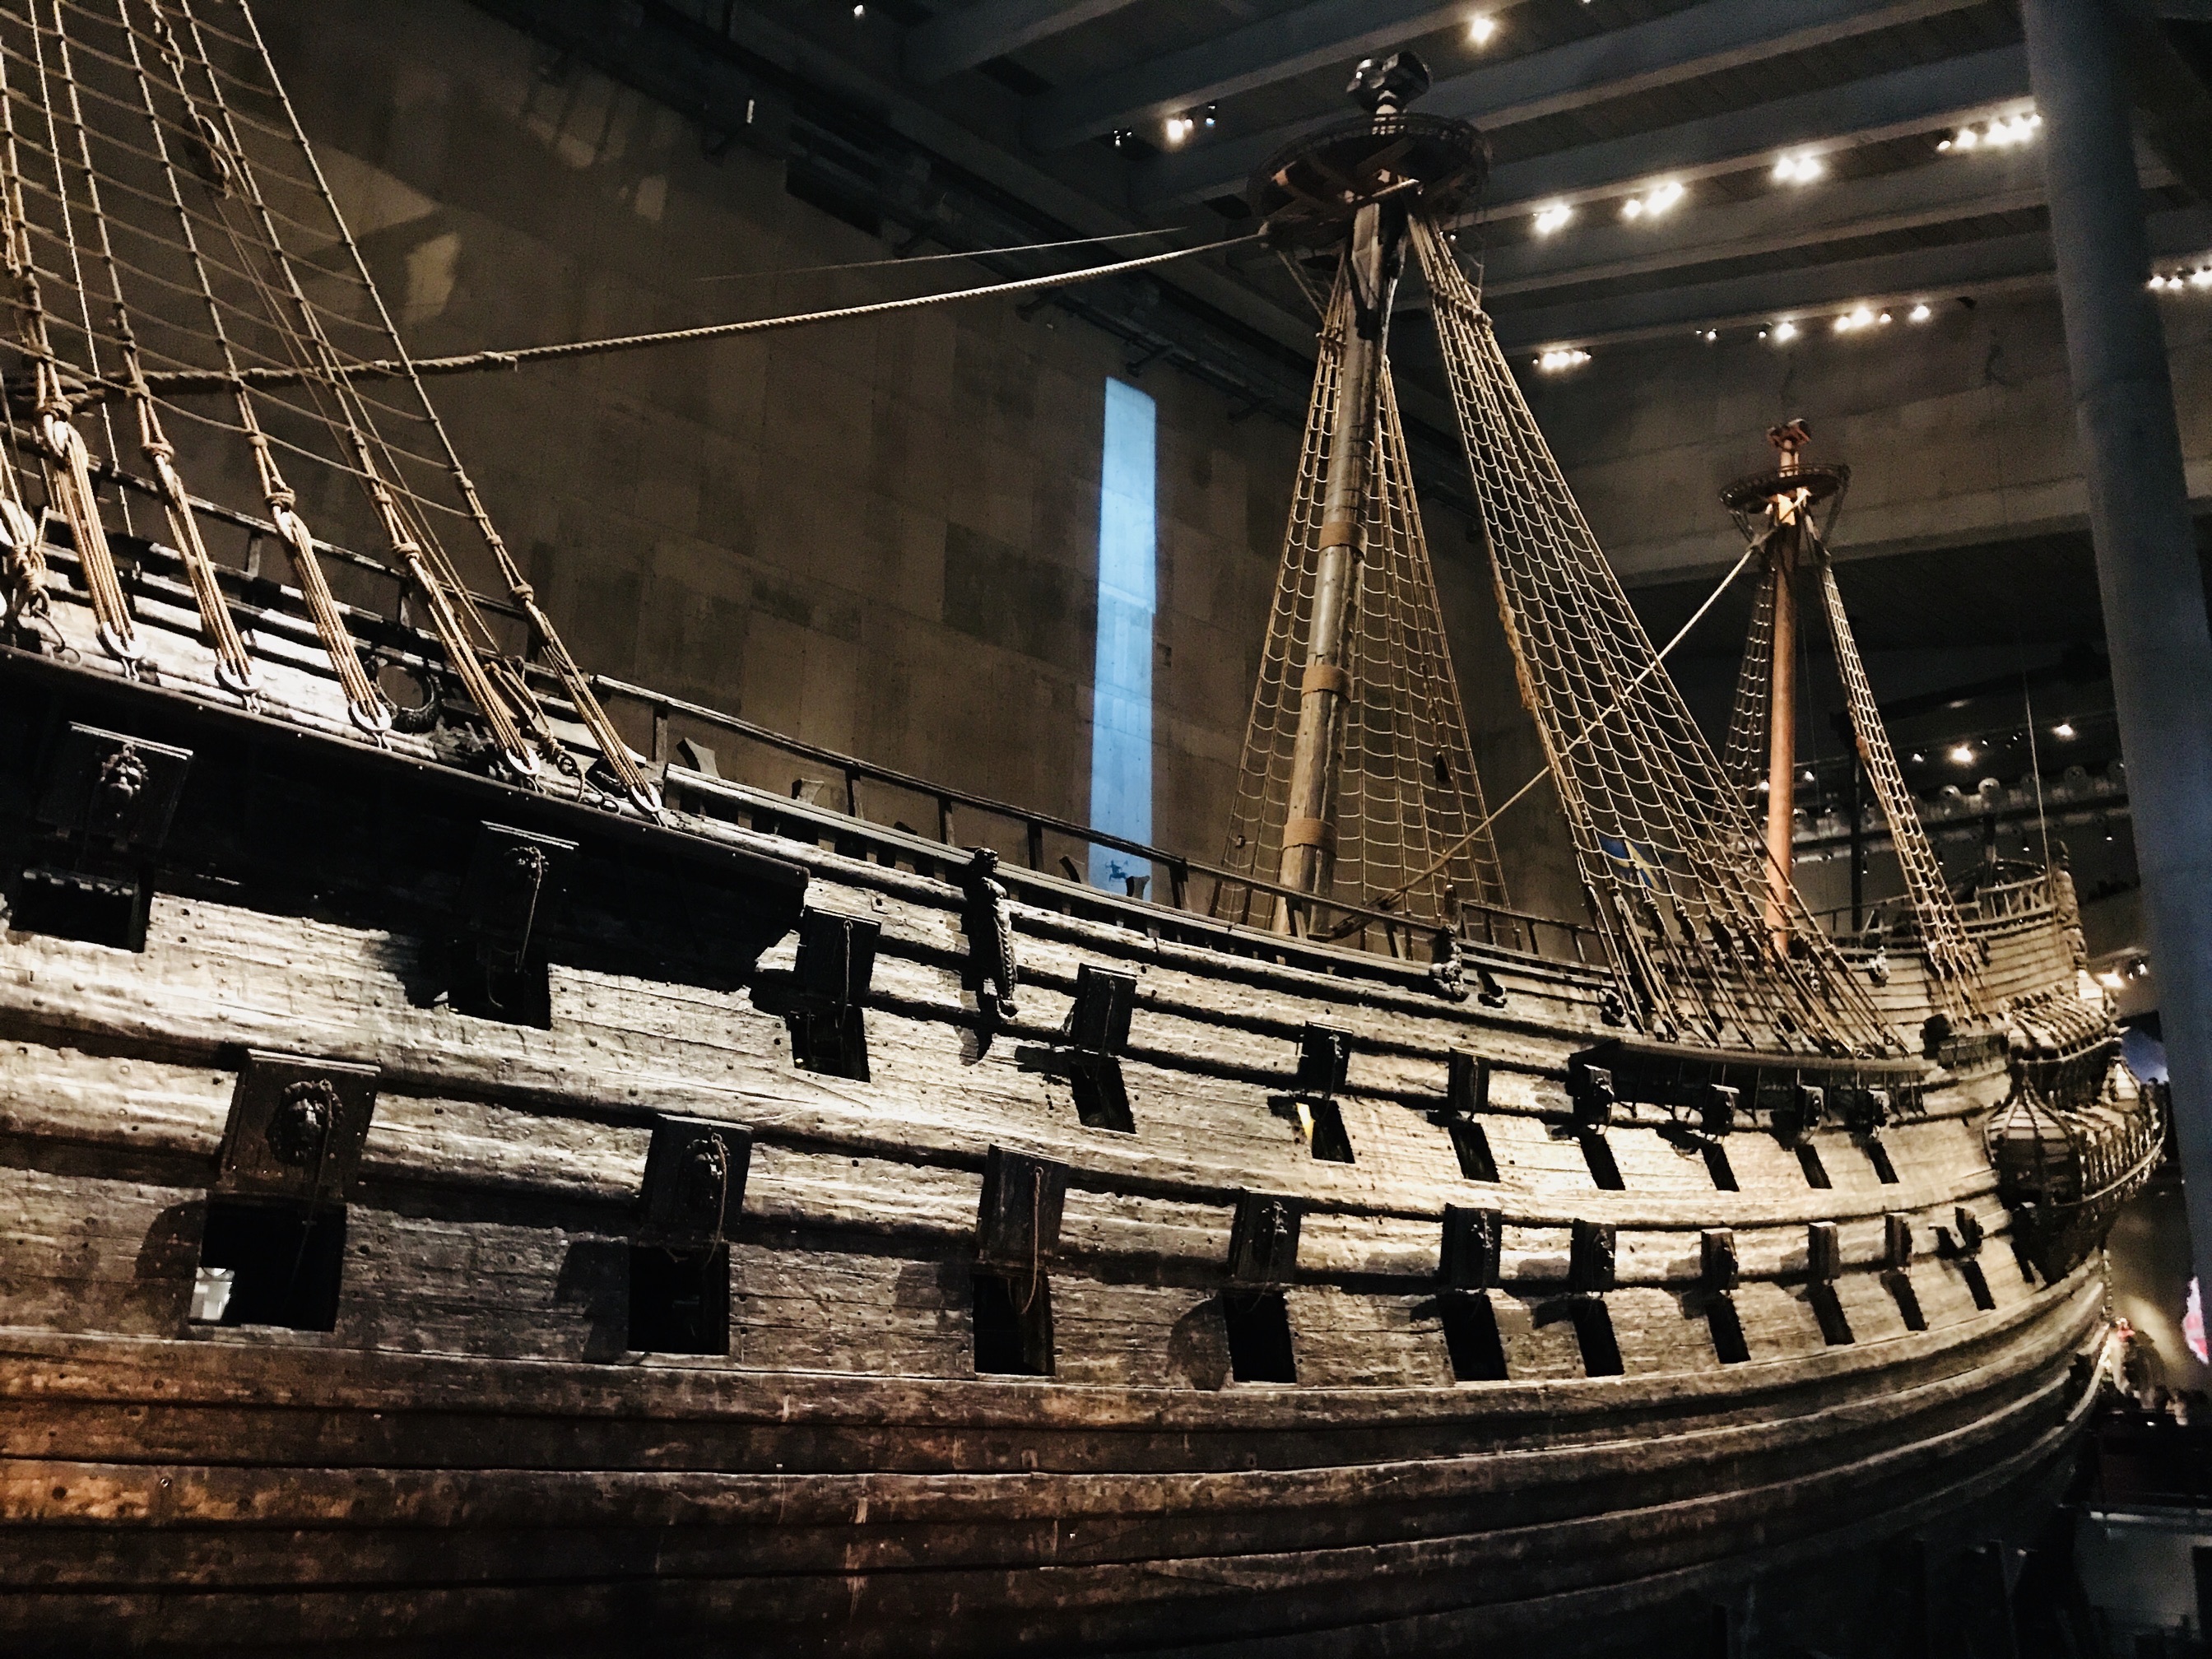 Vasa Museum attraction reviews - Vasa Museum tickets - Vasa Museum  discounts - Vasa Museum transportation, address, opening hours -  attractions, hotels, and food near Vasa Museum - Trip.com